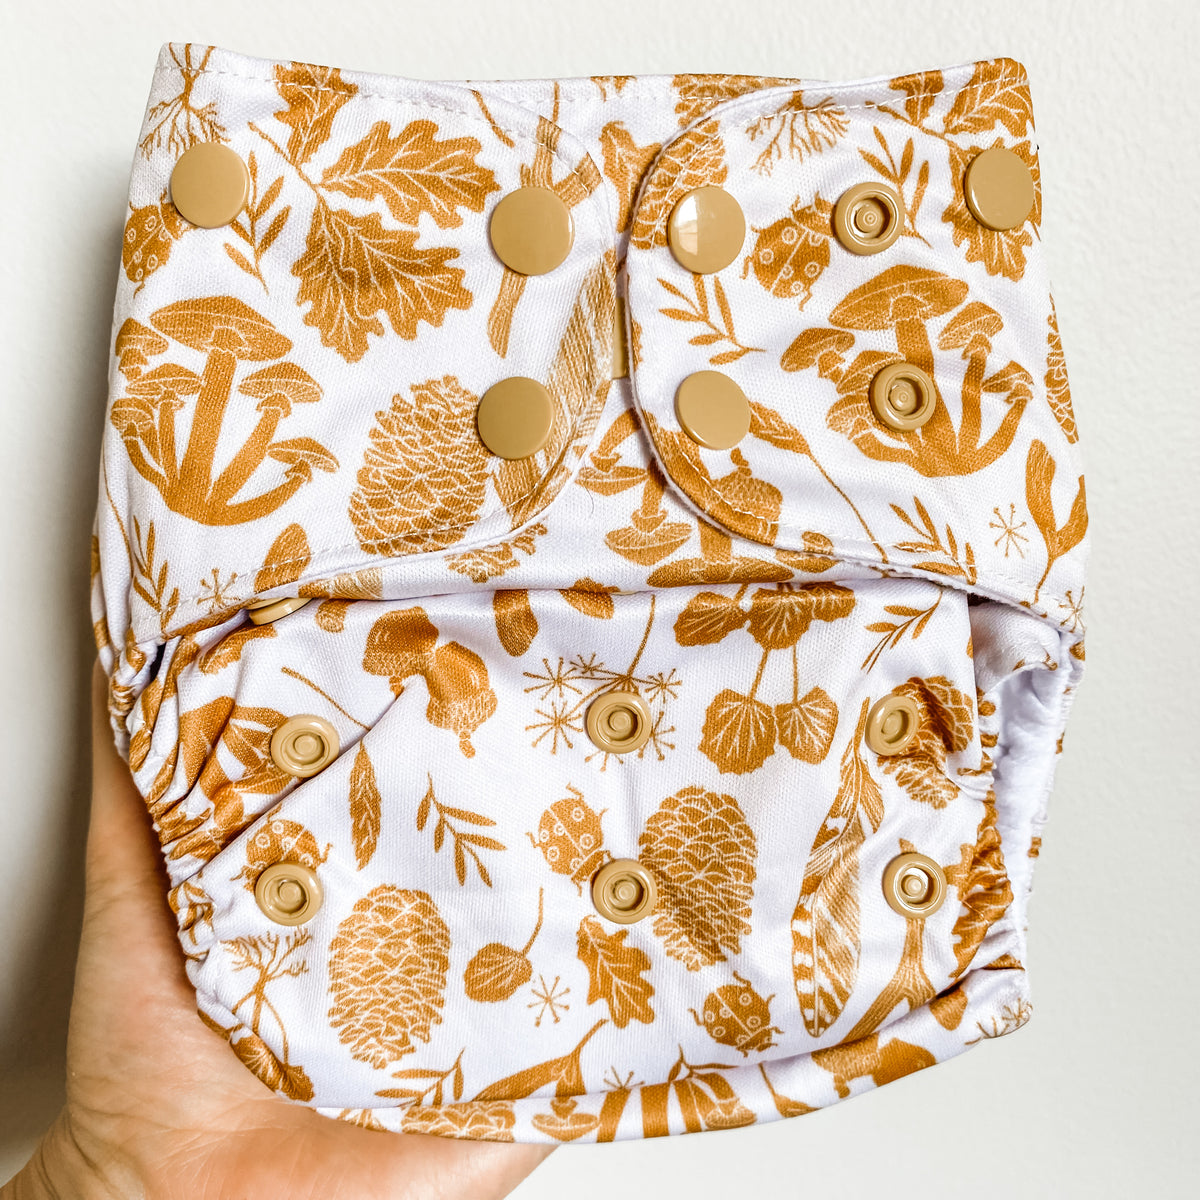 Gender neutral cloth nappies for earth-conscious parents